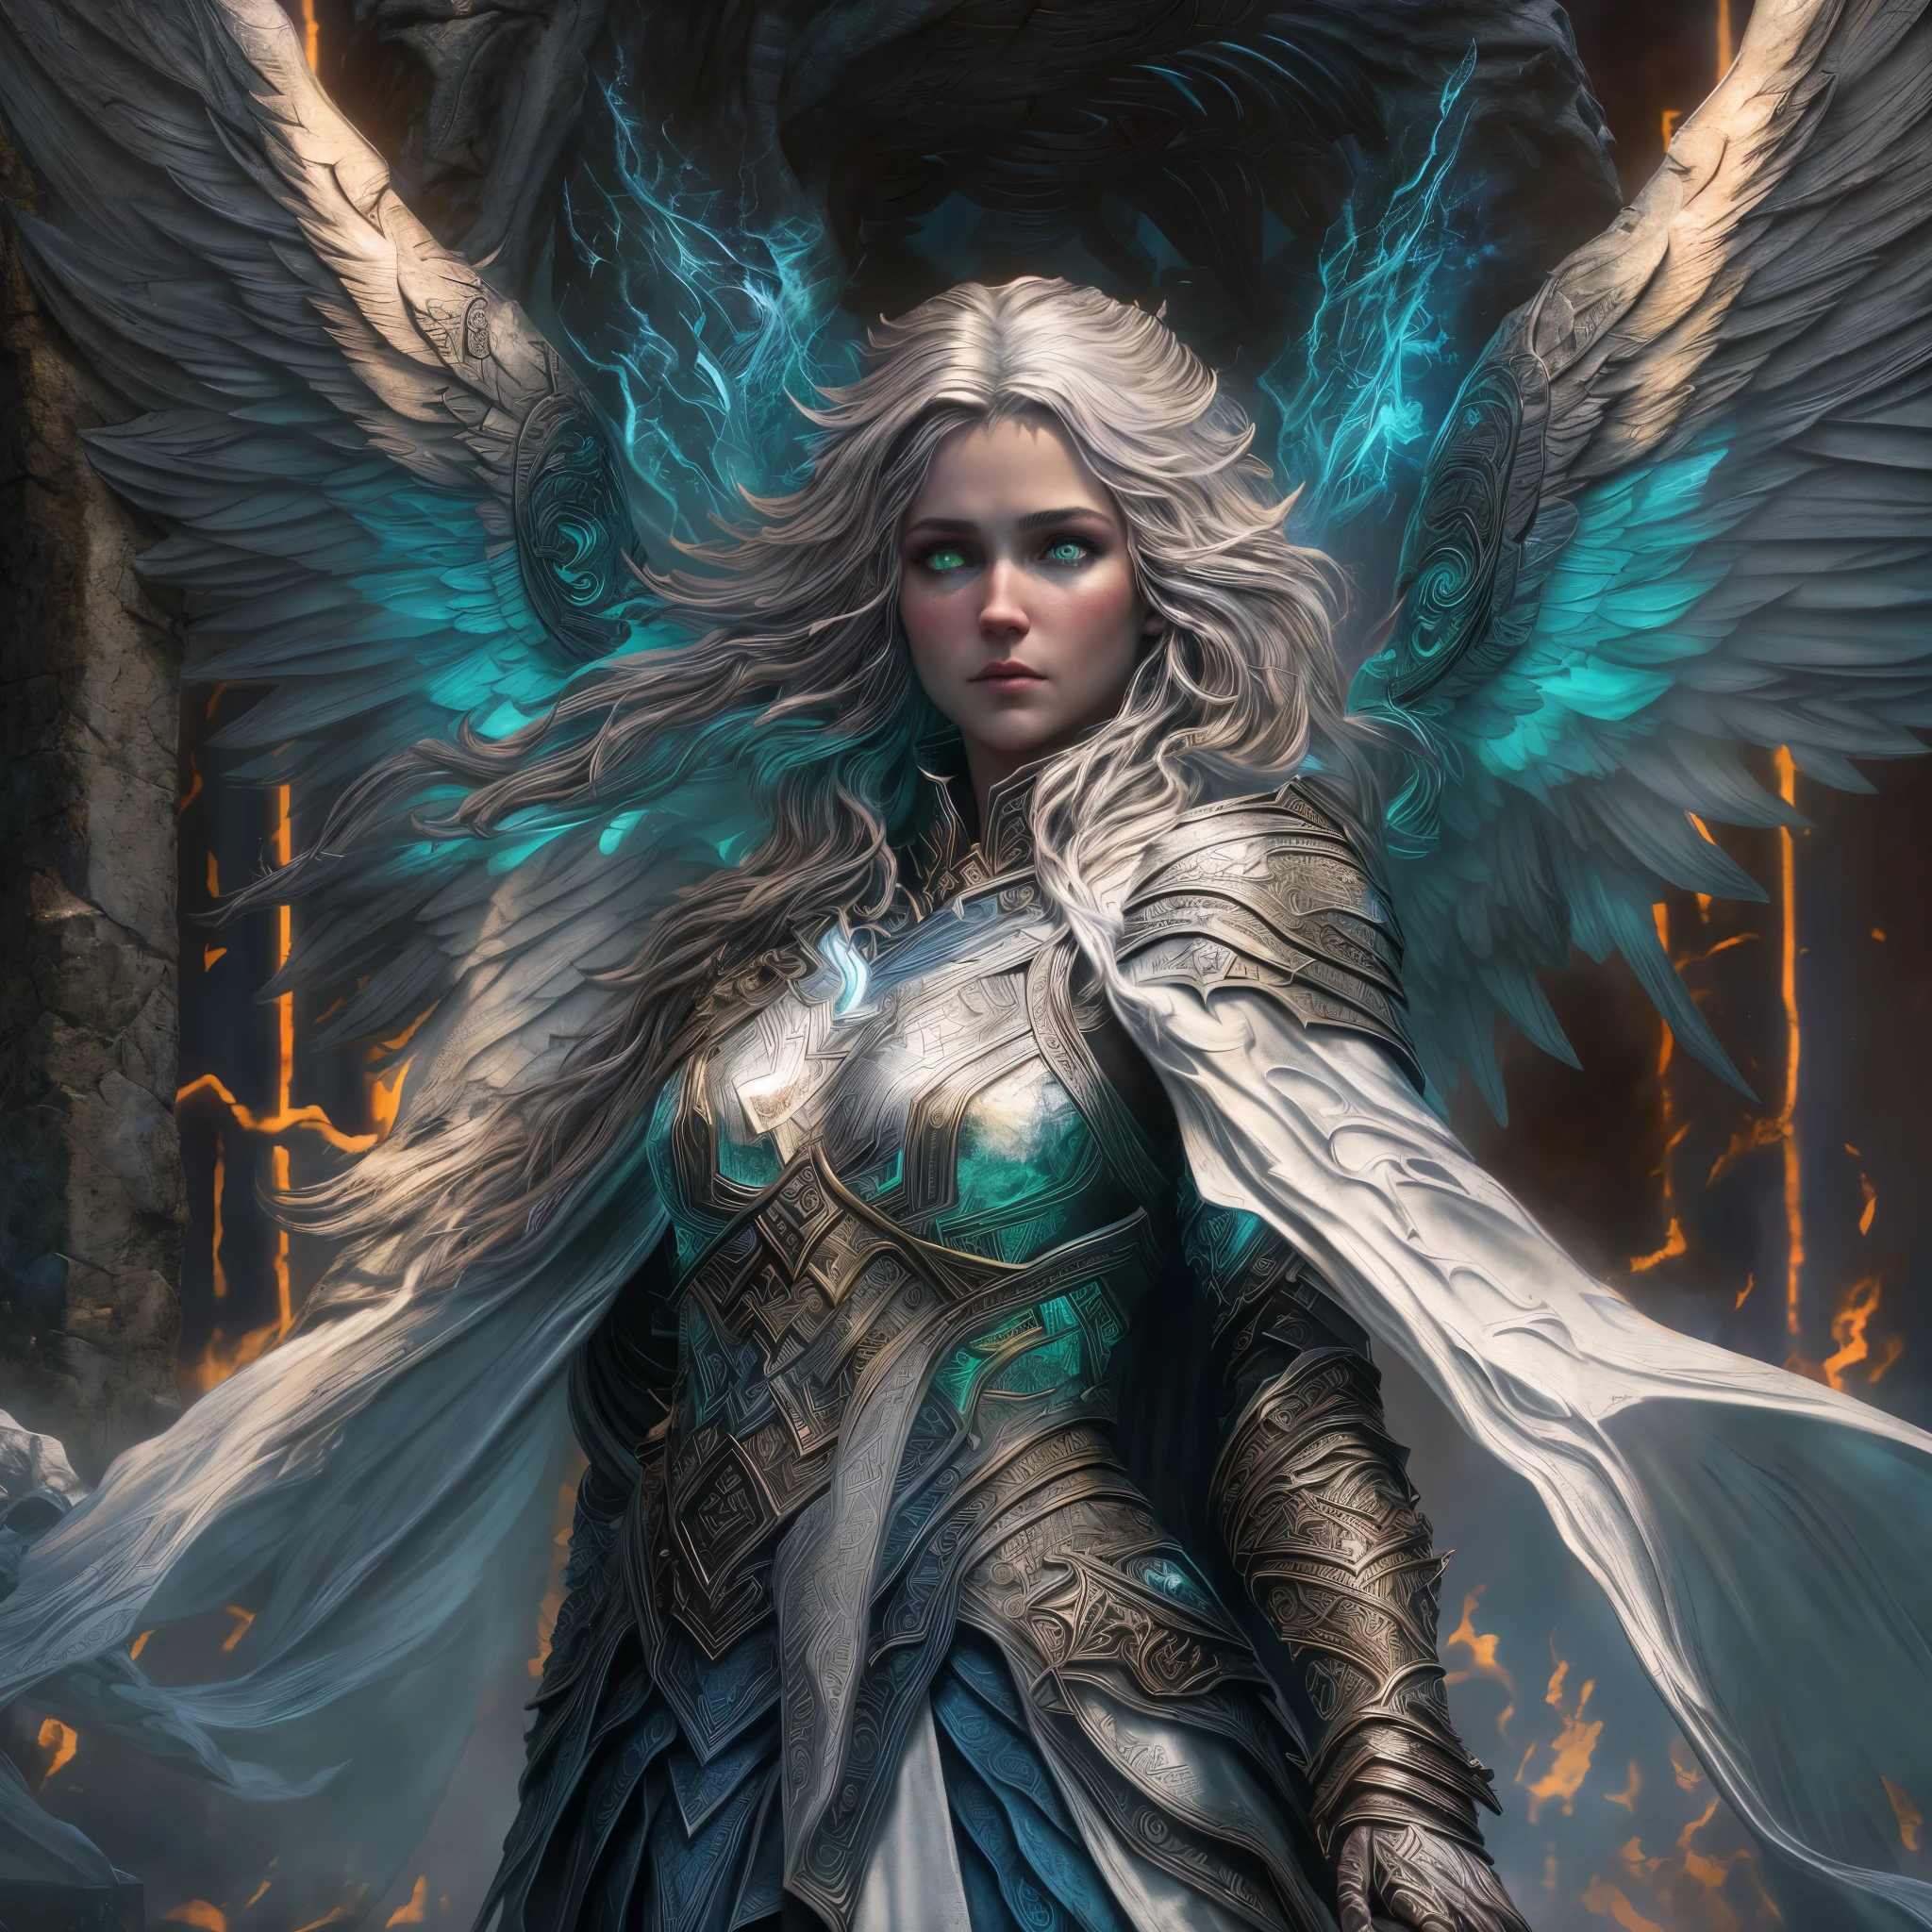 8k, ultra detailed, masterpiece, best quality, (extremely detailed), arafed, dnd art, panoramic view, full body, 1soloaasimar cleric casting a flaming spell,  aasimar, female, (Masterpiece 1.3, intense details), female, cleric, holy warrior, casting radiant spell, divine spell (Masterpiece 1.3, intense details) large angelic wings, azure angelic wings spread (Masterpiece 1.3, intense details), fantasy divinel background (Masterpiece 1.5, intense details), sun, clouds, wearing white armor  (Masterpiece 1.5, intense details), blue cloak, flowing robe (Masterpiece 1.3, intense details), high heeled boots (Masterpiece 1.3, intense details), armed with mace gl0w1ngR, metalic hair, green eyes, intense eyes, feminine, ultra detailed face, (Masterpiece 1.5, best quality), anatomically correct (Masterpiece 1.3, intense details), determined face, divine light, cinematic lighting, soft light, silhouette, photorealism, panoramic view (Masterpiece 1.3, intense details) , Wide-Angle, Ultra-Wide Angle, 8k, highres, best quality, high details